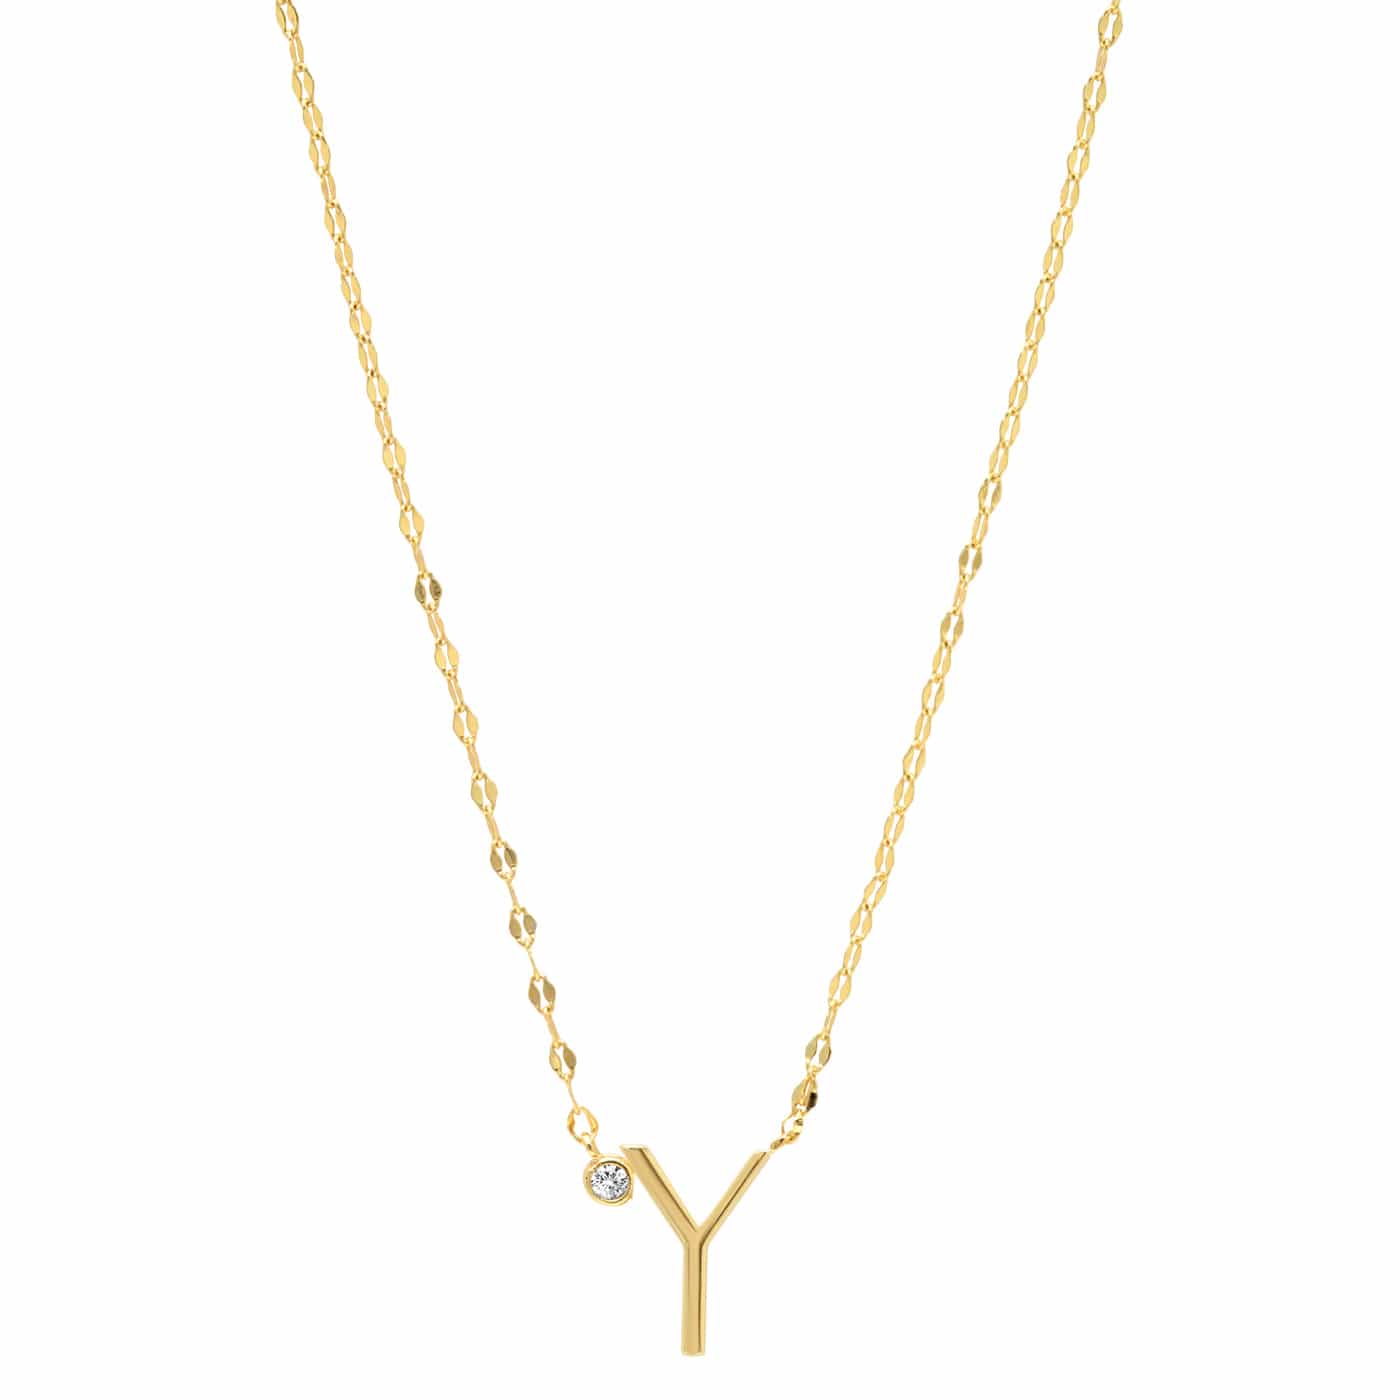 TAI JEWELRY Necklace Y Medium Sized Initial Necklace With Cz Accent